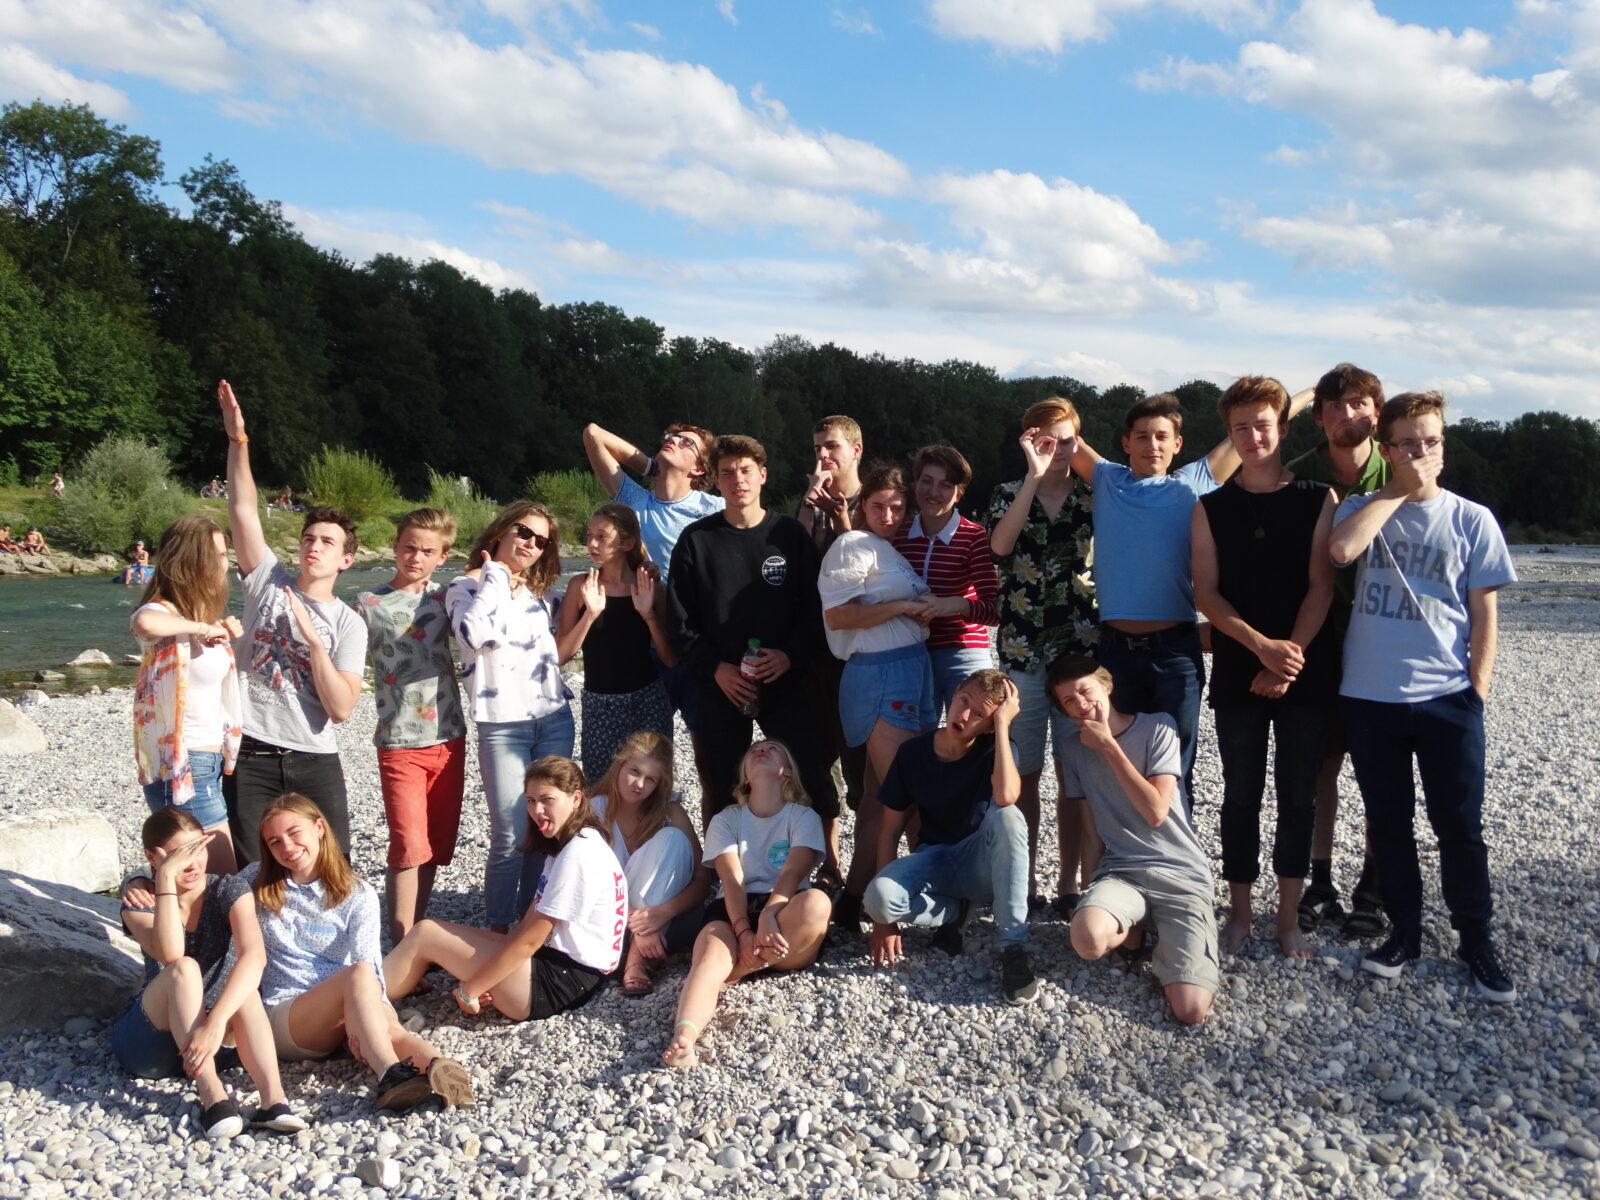 The project-orienting camp in Munich